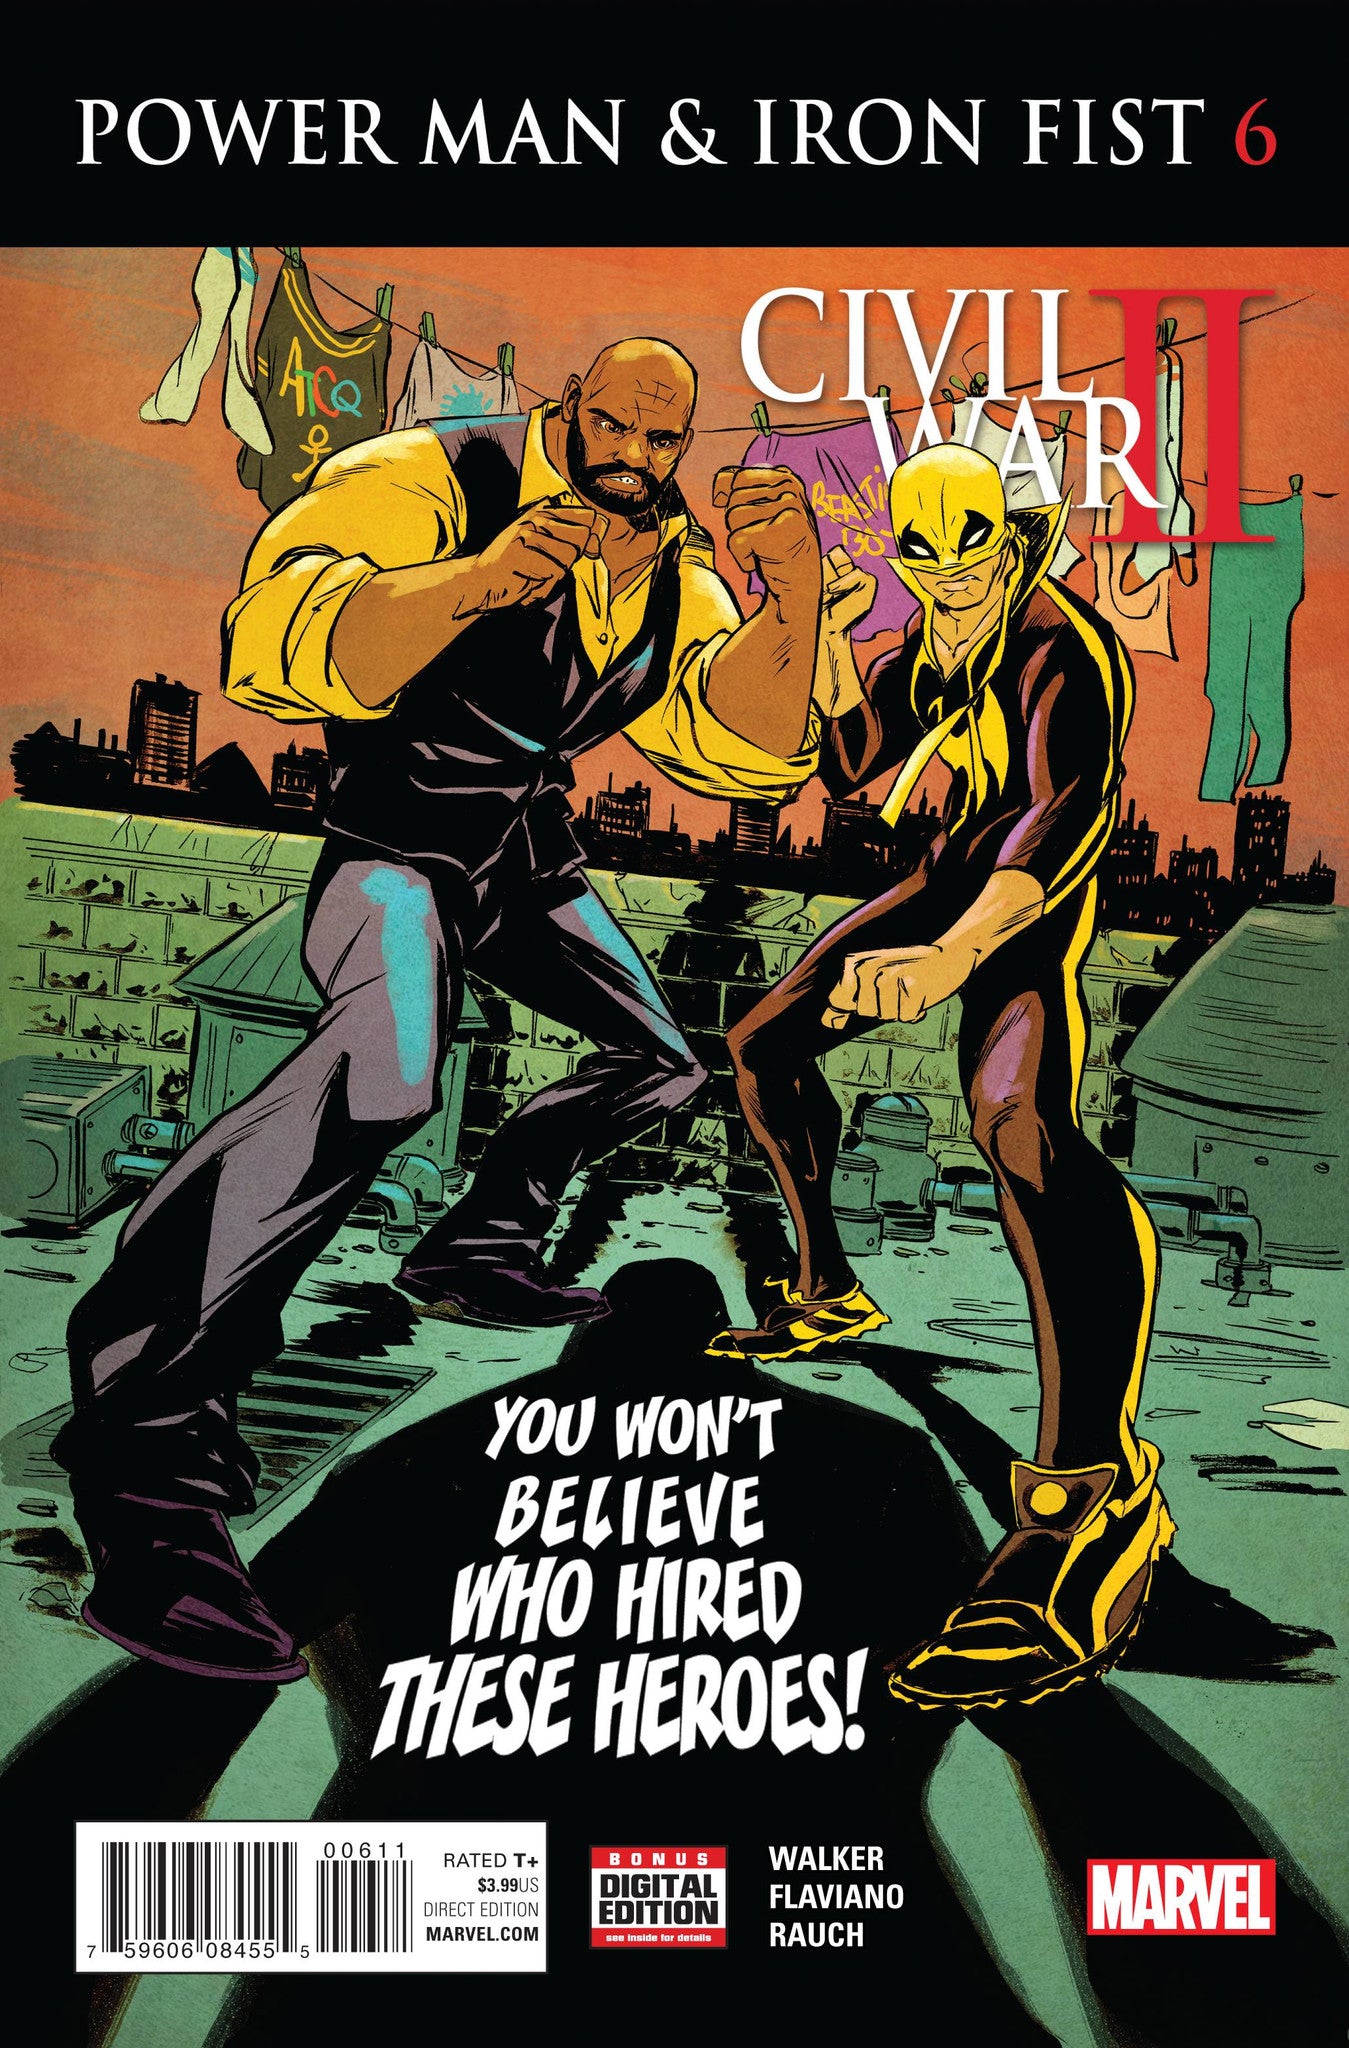 POWER MAN AND IRON FIST #6 CW2 COVER